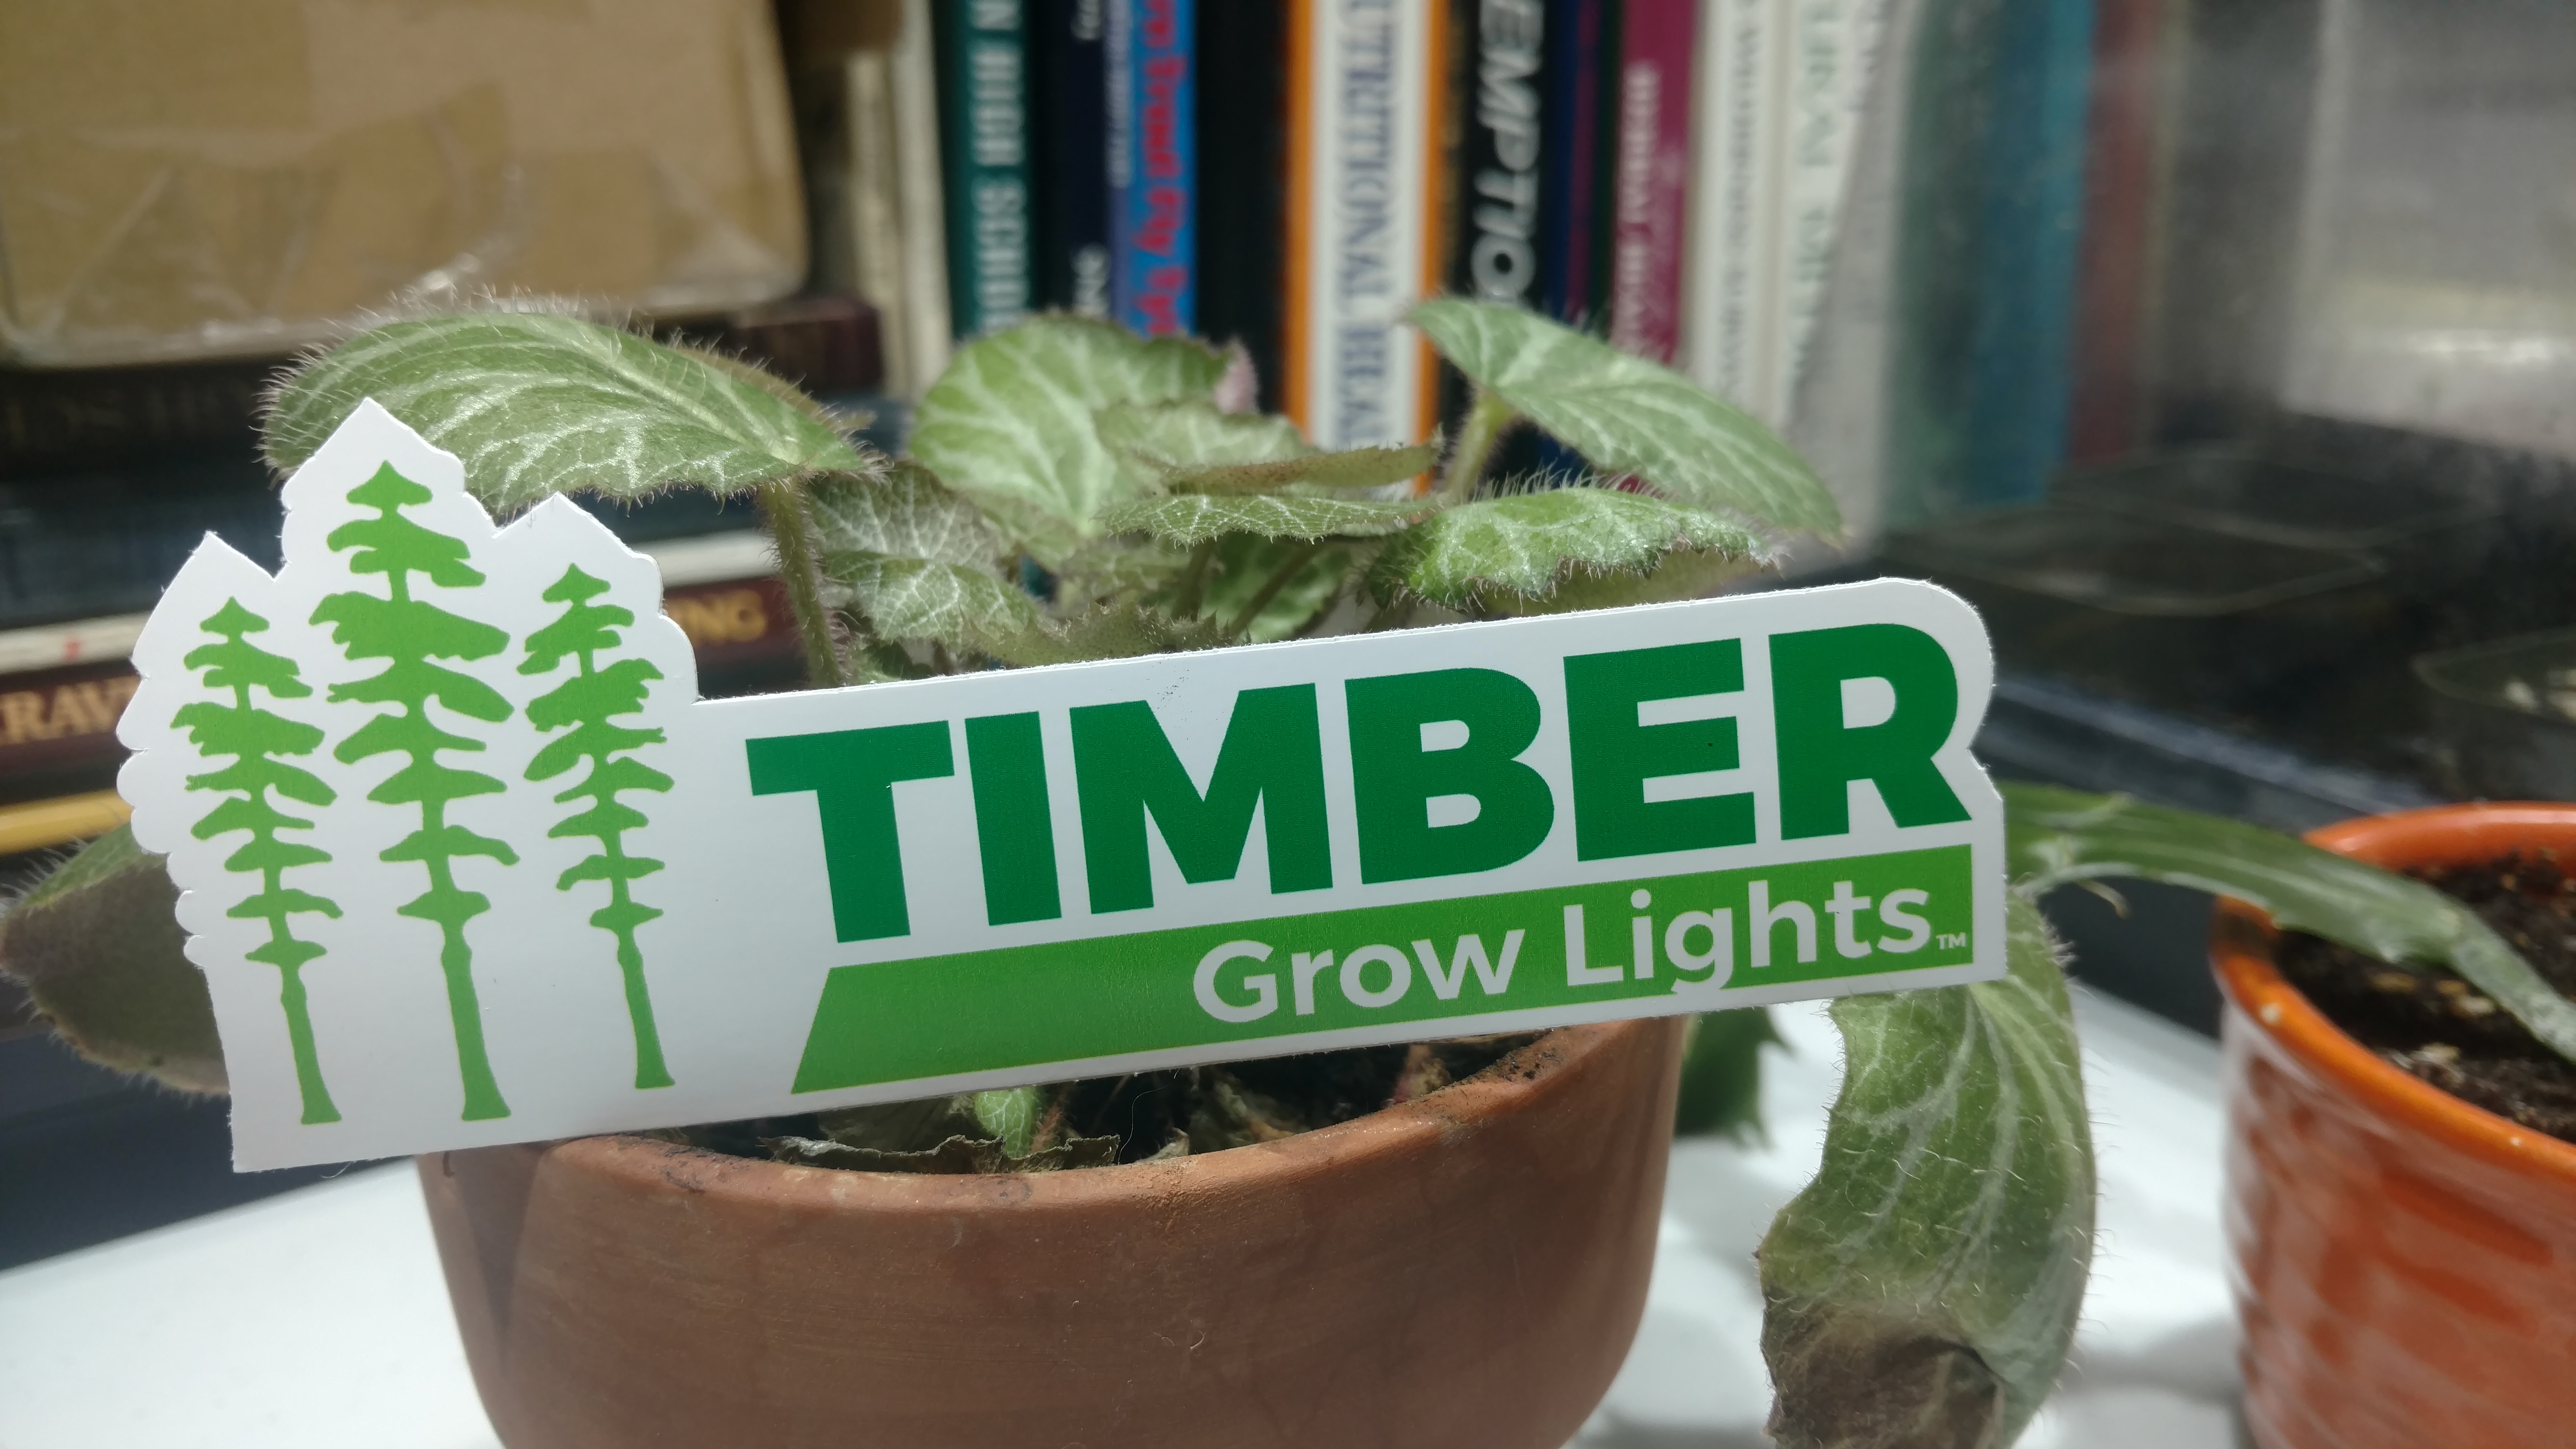 We ordered our DIY COB LED as a kit from a small company called Timber Grow Lights.